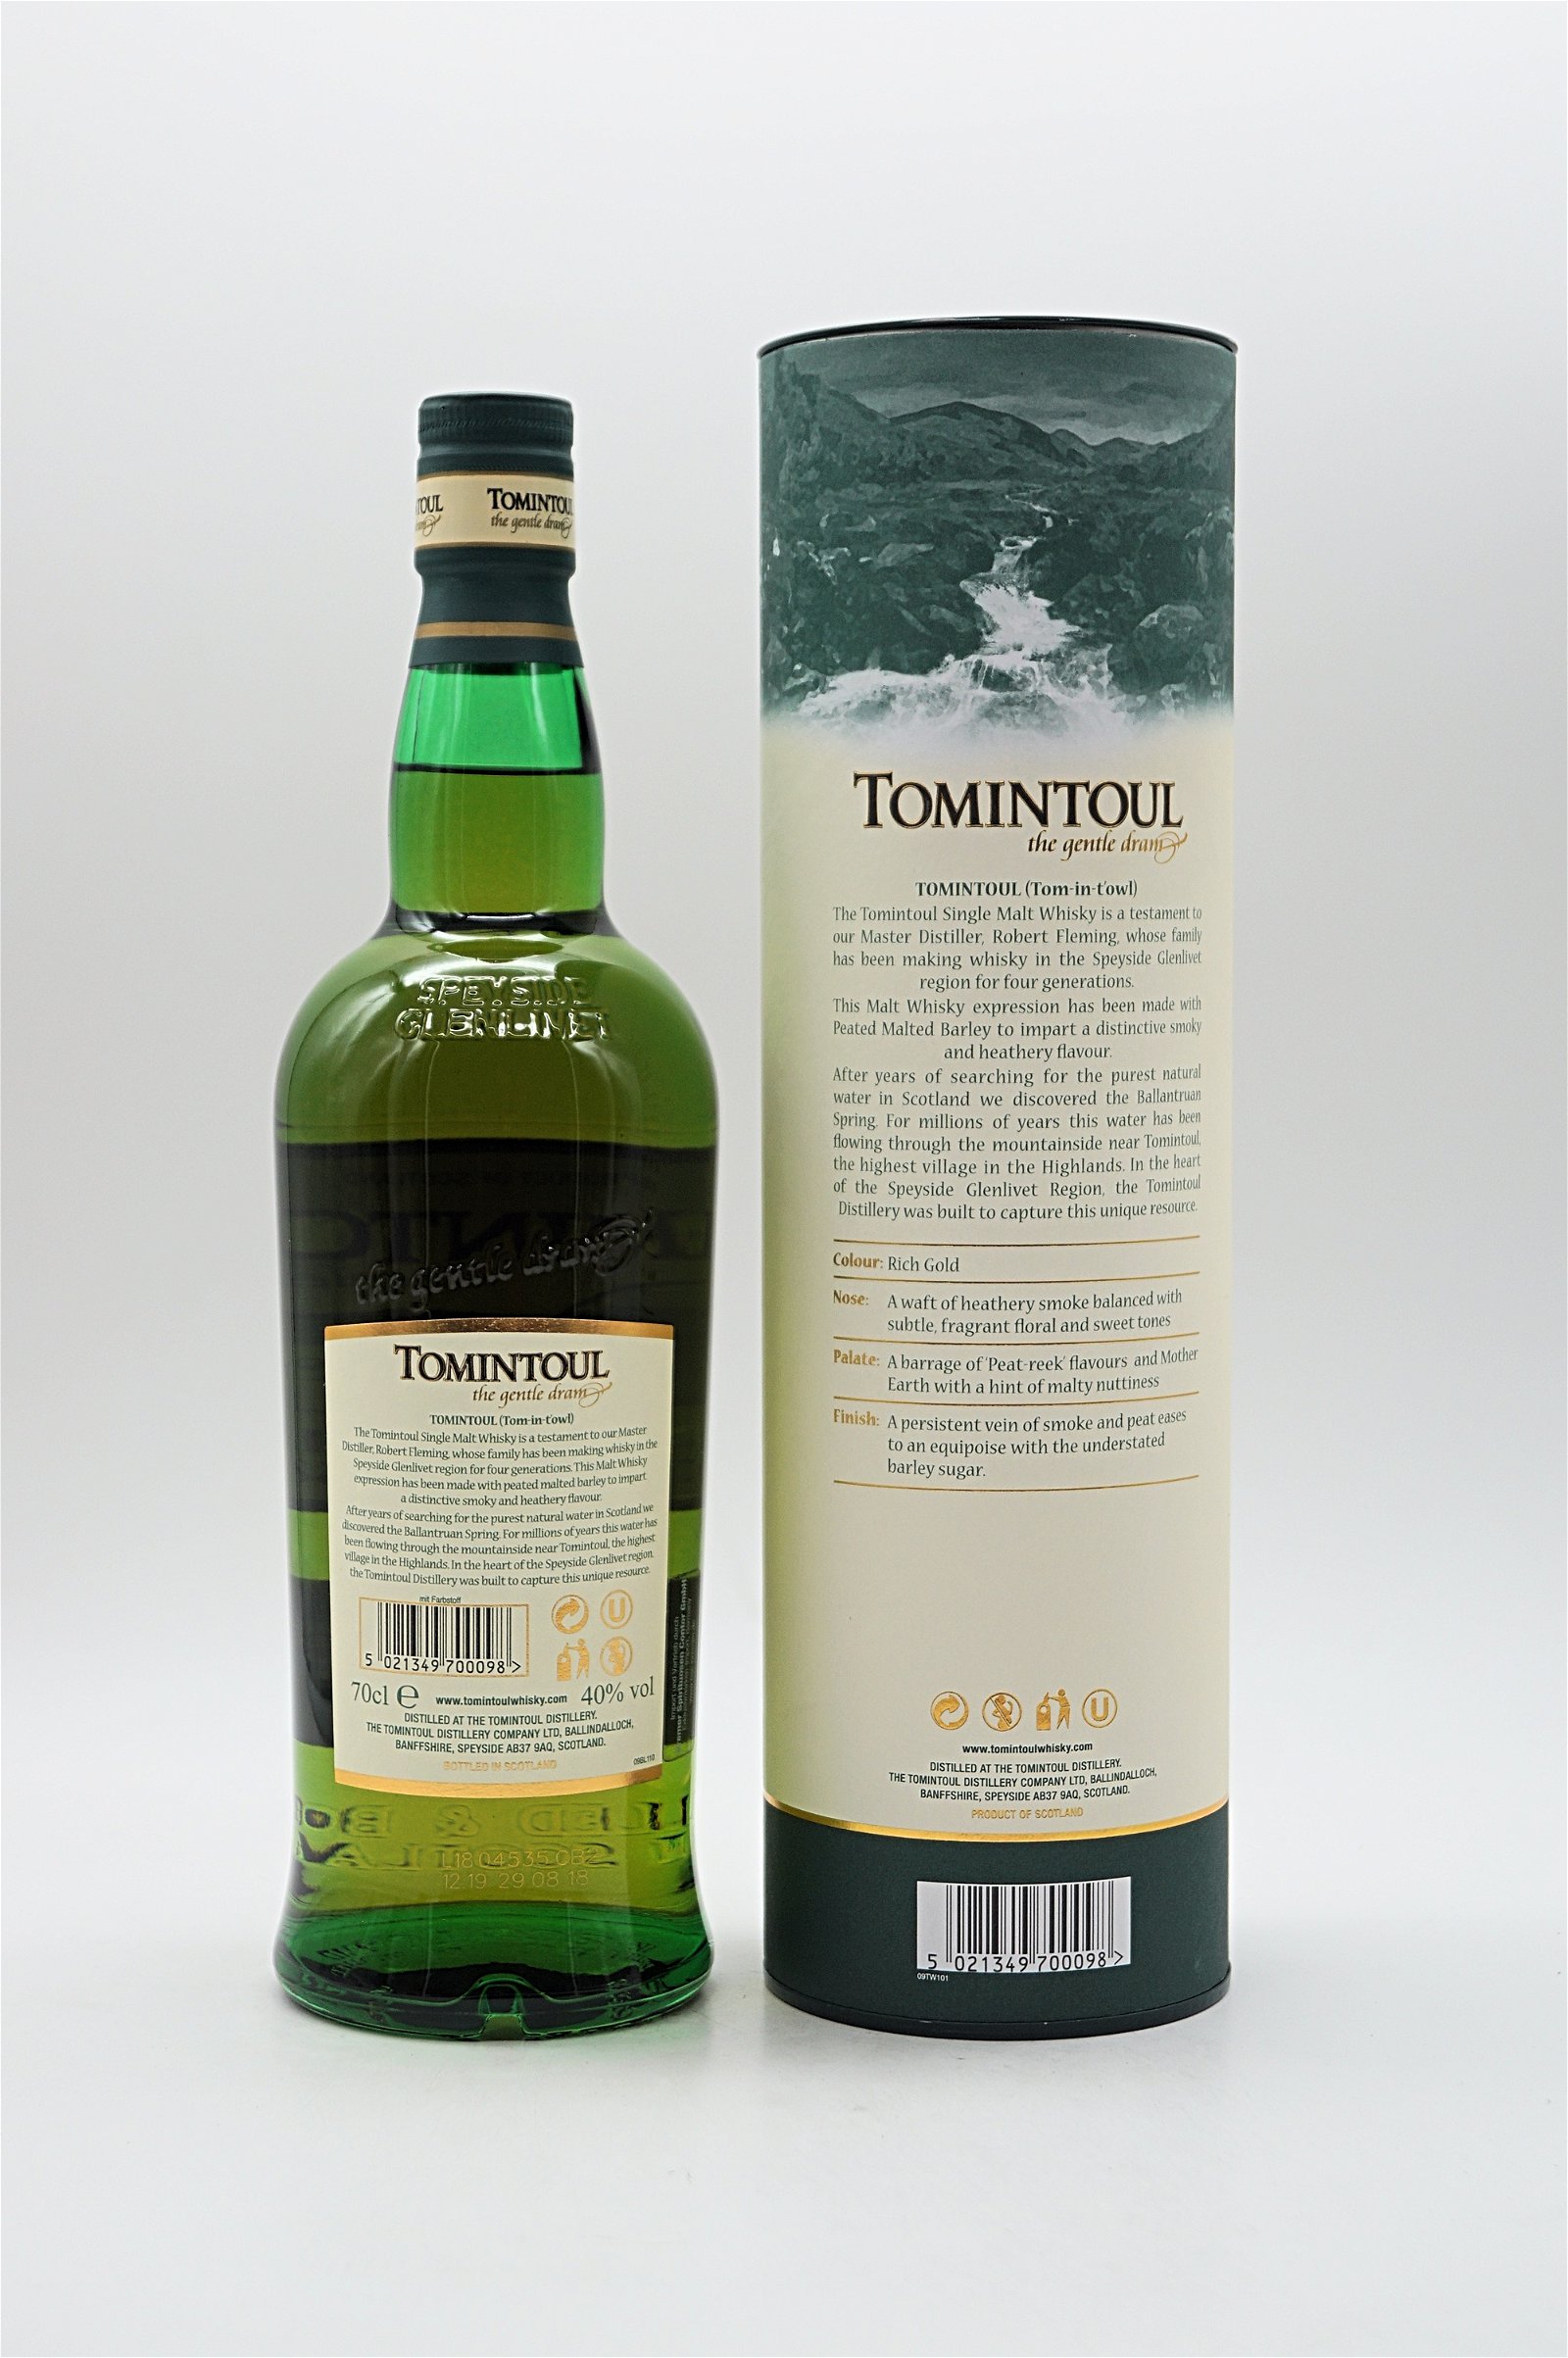 Tomintoul With A Peaty Tang Single Malt Scotch Whisky